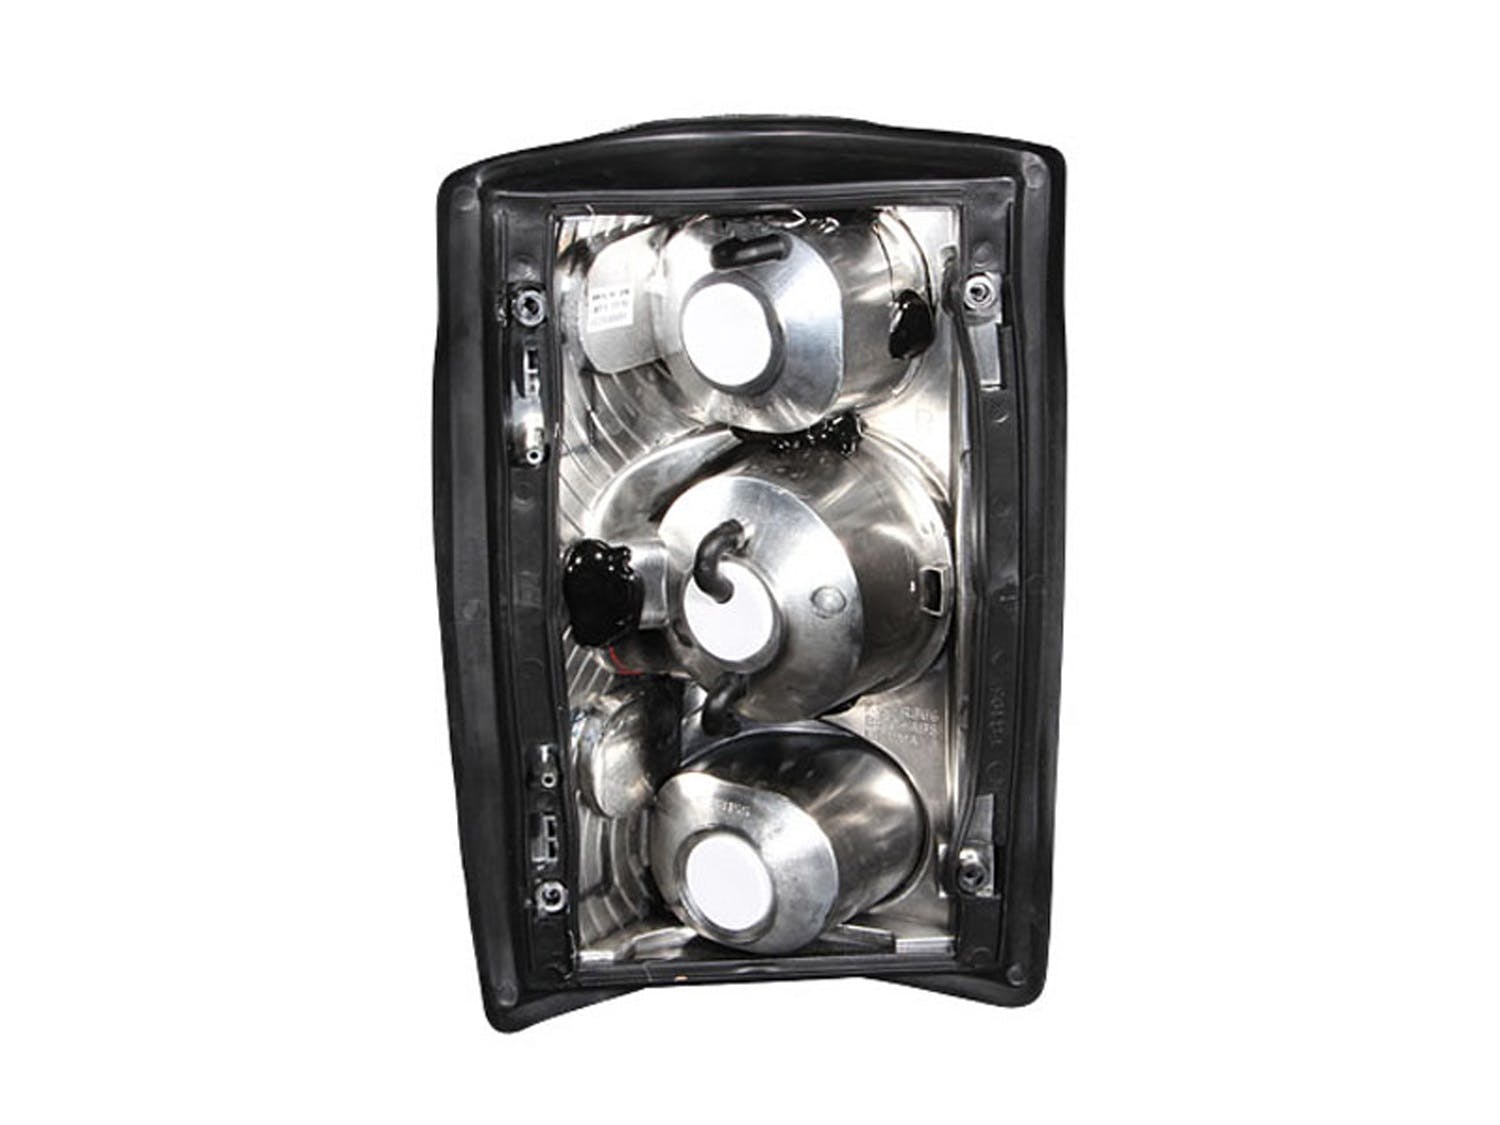 AnzoUSA 211049 Taillights Chrome